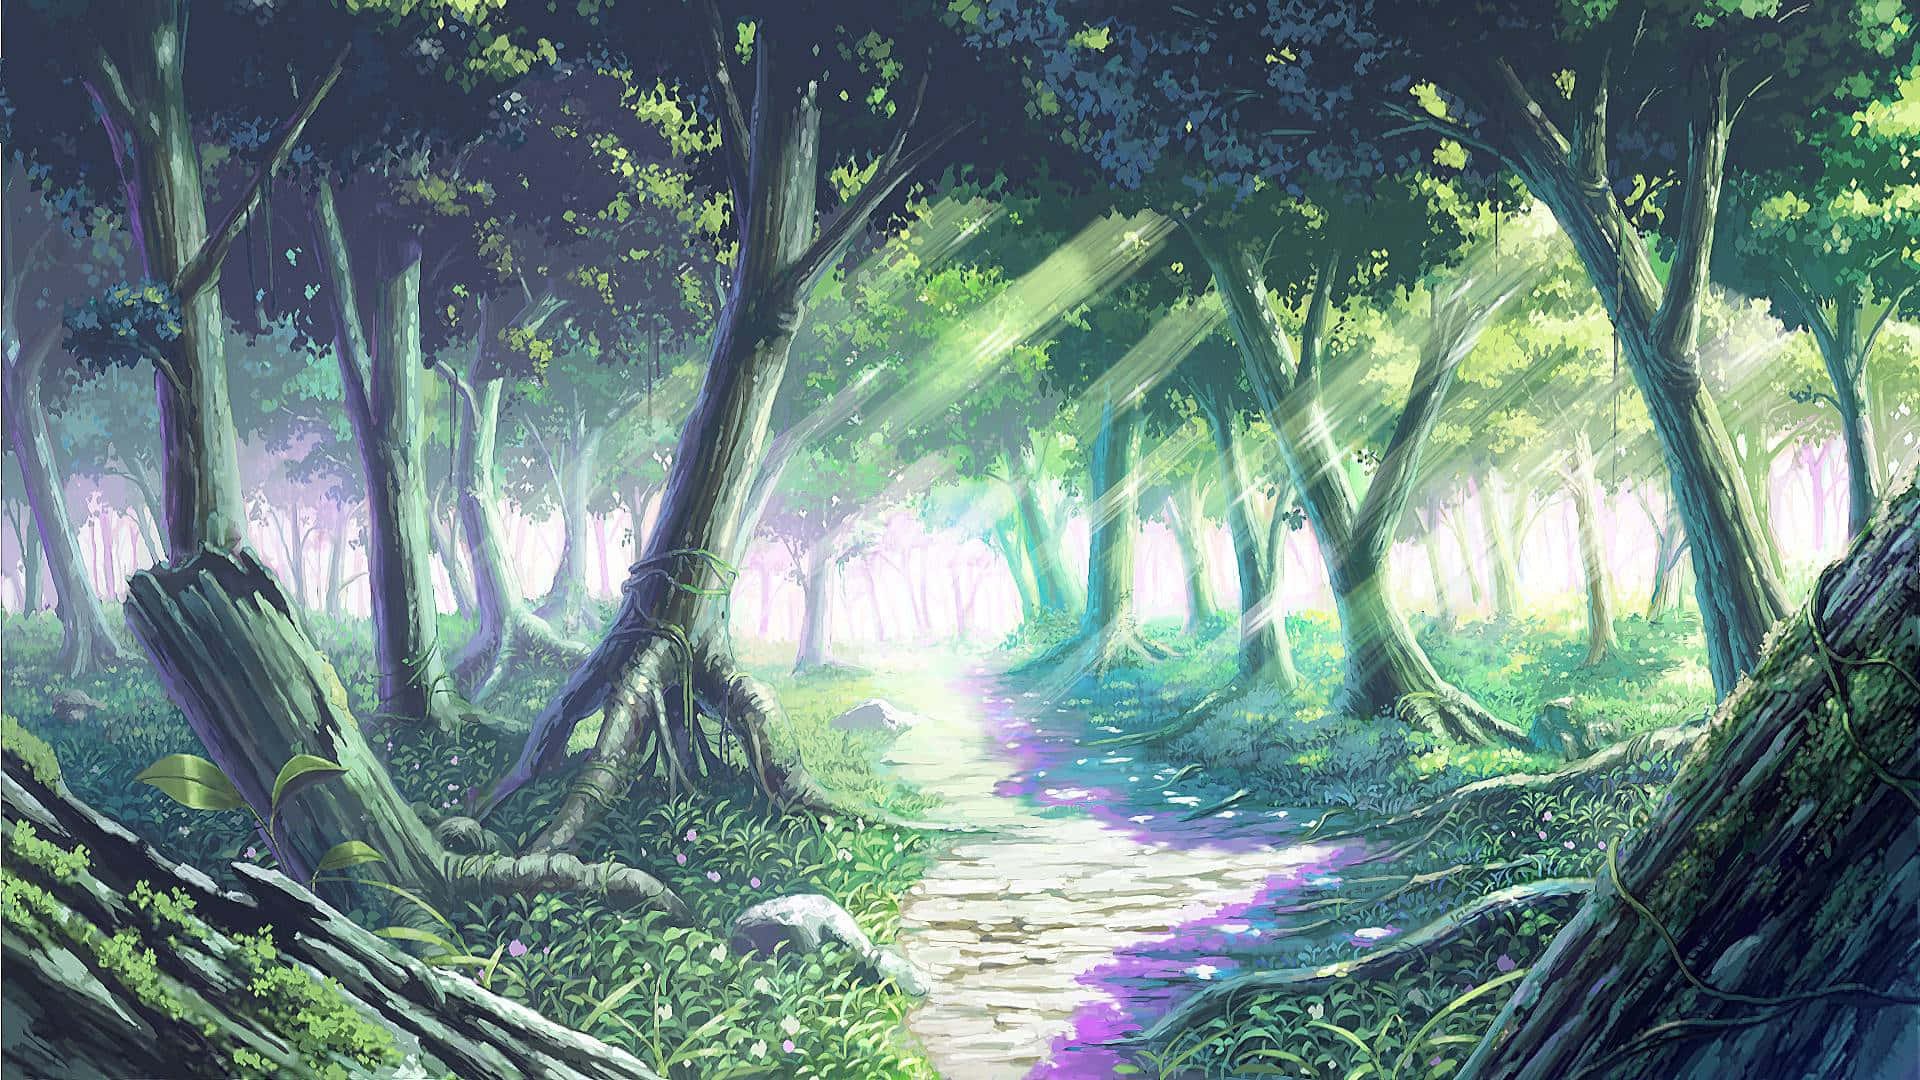 "Step into a mesmerizing landscape - explore the depths of Anime Forest!" Wallpaper